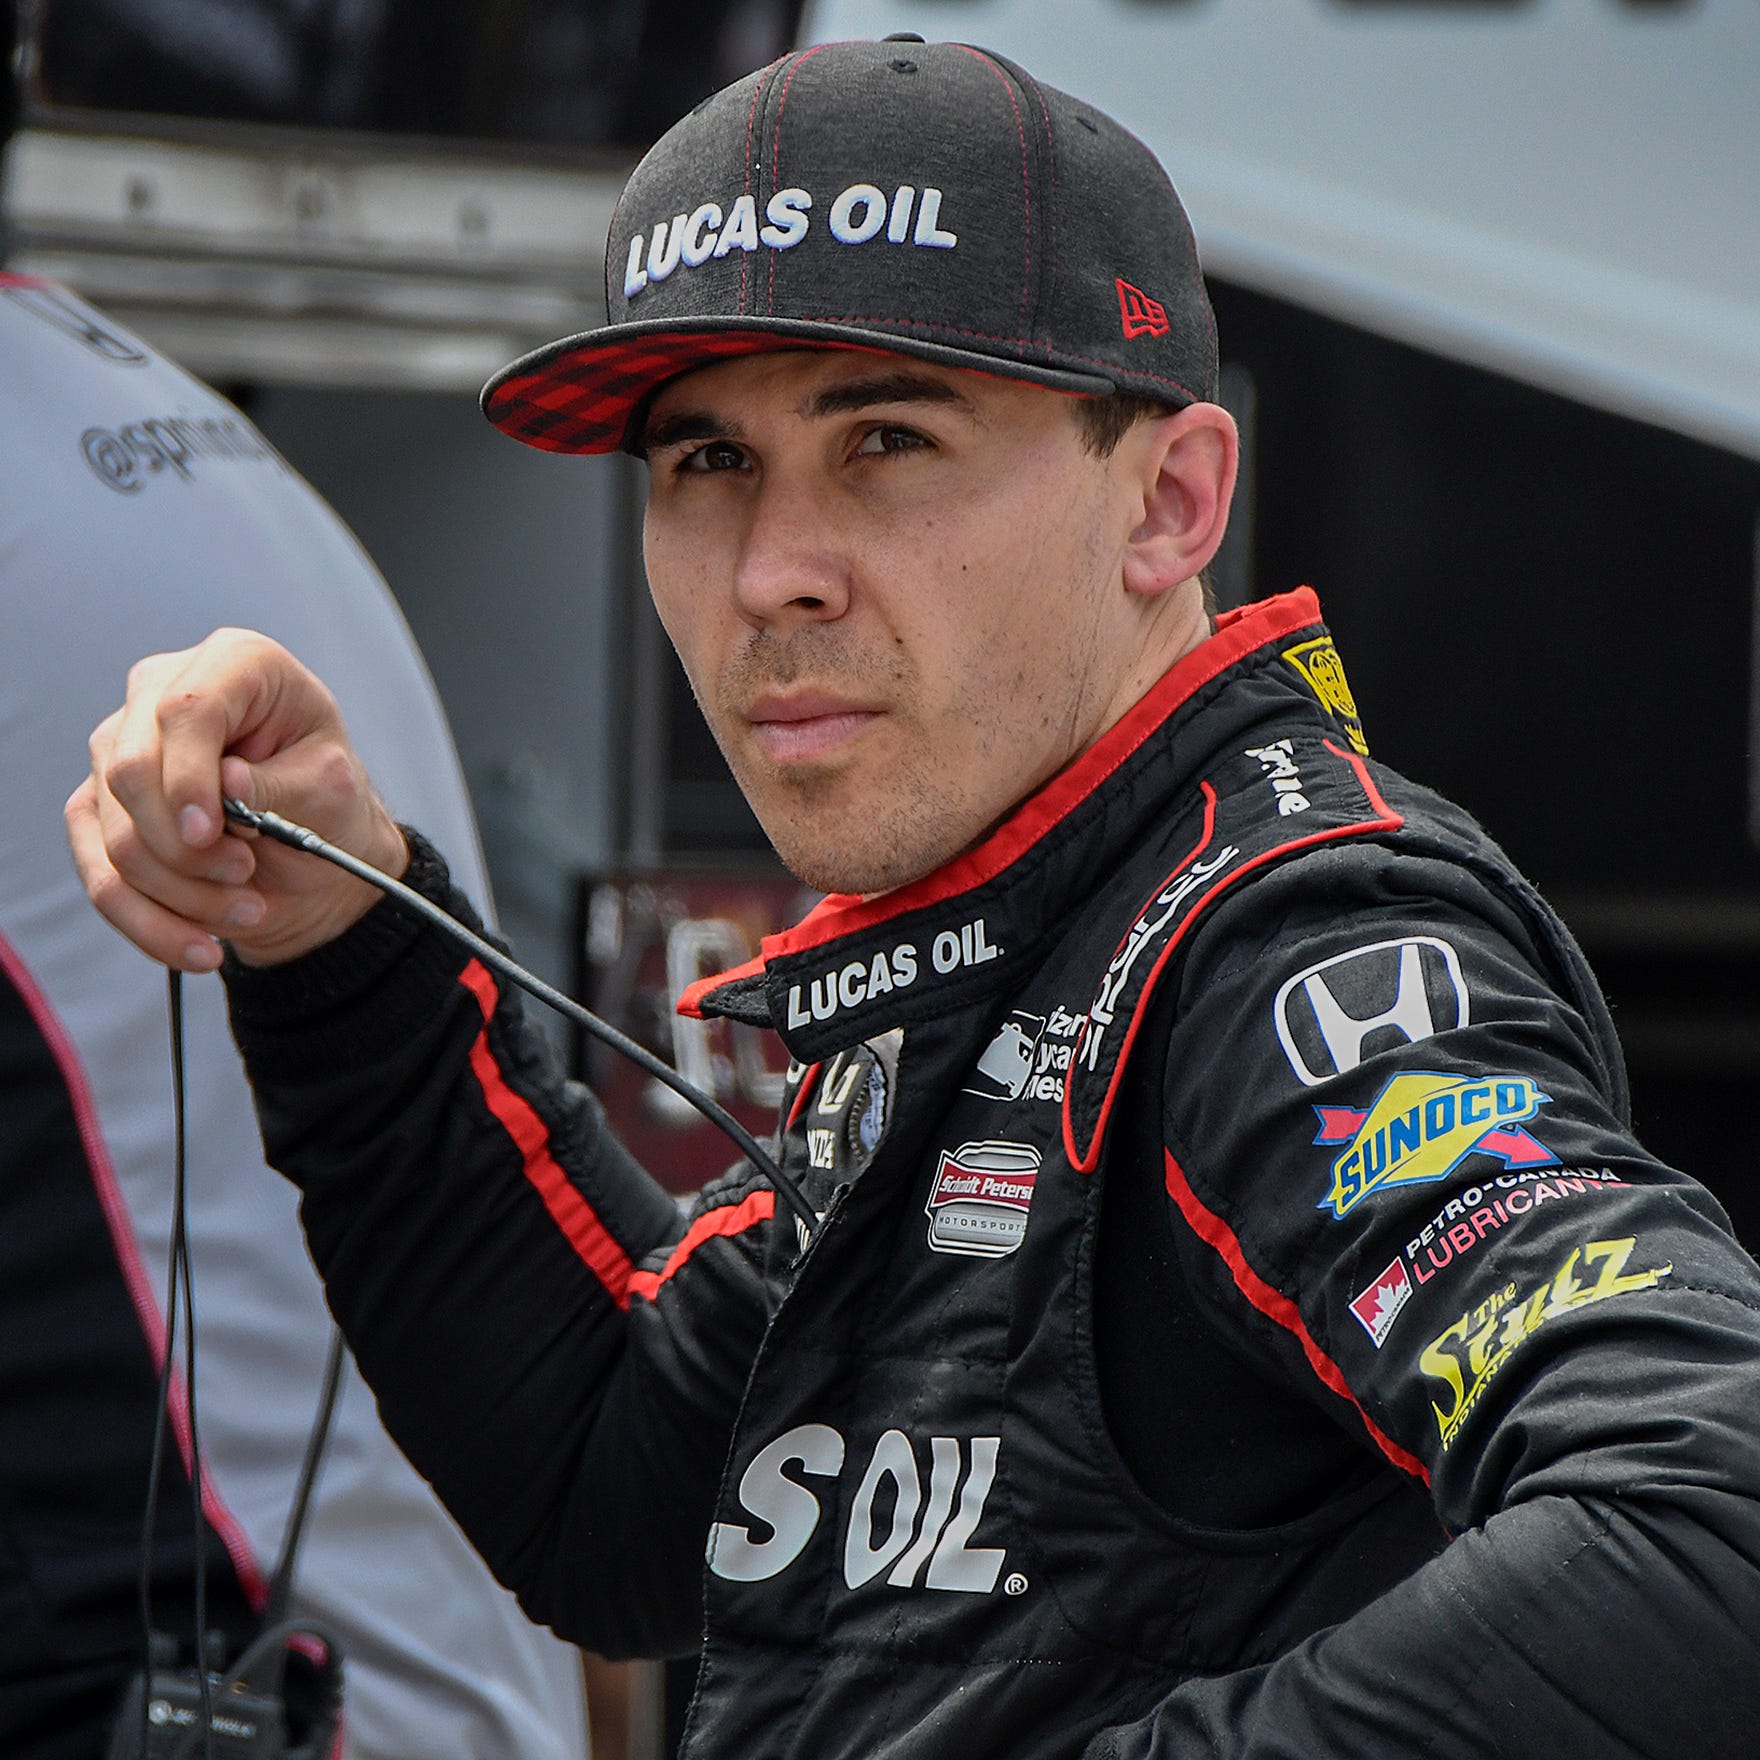 Schmidt Peterson Motorsports IndyCar driver Robert Wickens (6) during practice for the Indianapolis 500 at the Indianapolis Motor Speedway on Wednesday, May 16, 2018.